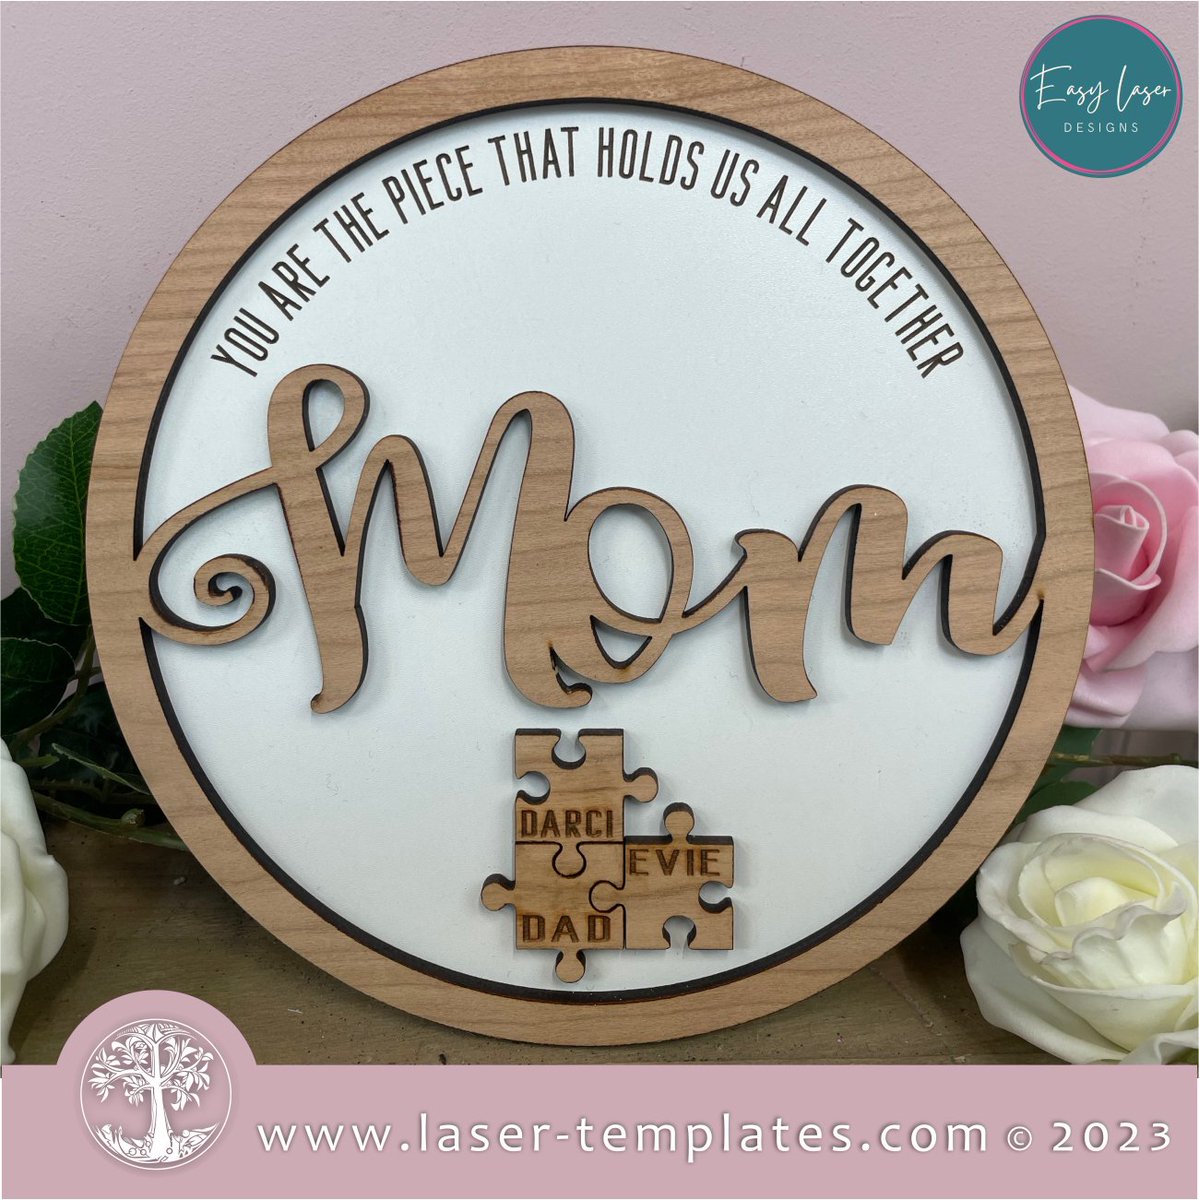 SALE NOW ON!! Get 30% off all Mother's Day designs, only until this Sunday. Use the code MOM2024 at checkout and get all your favourite laser cut-ready templates for less. laser-templates.com/collections/mo… #sale #mothersdaygift #lasercuttingandengraving #laserfiles #SVGFiles